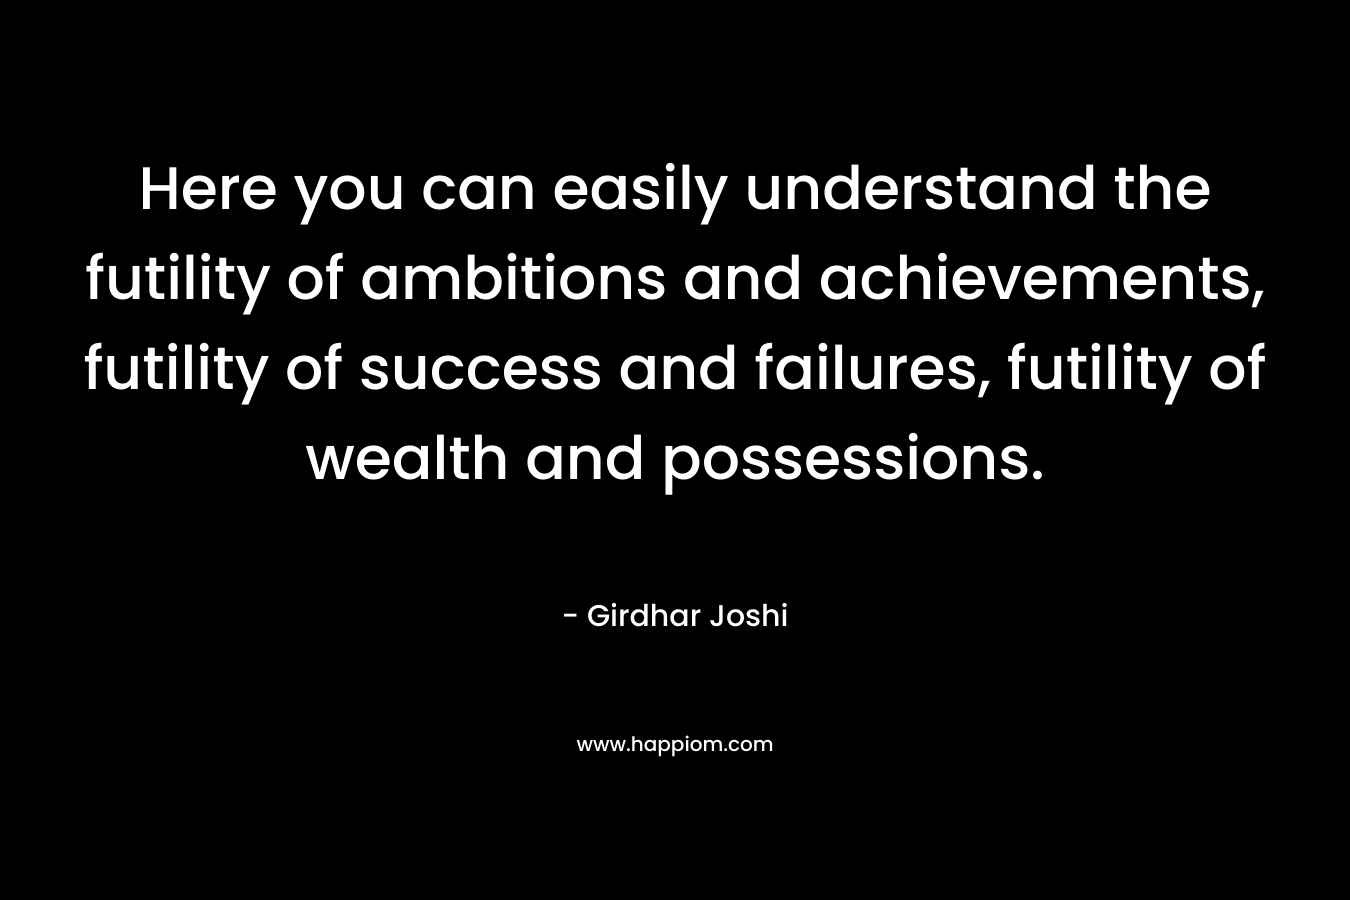 Here you can easily understand the futility of ambitions and achievements, futility of success and failures, futility of wealth and possessions.